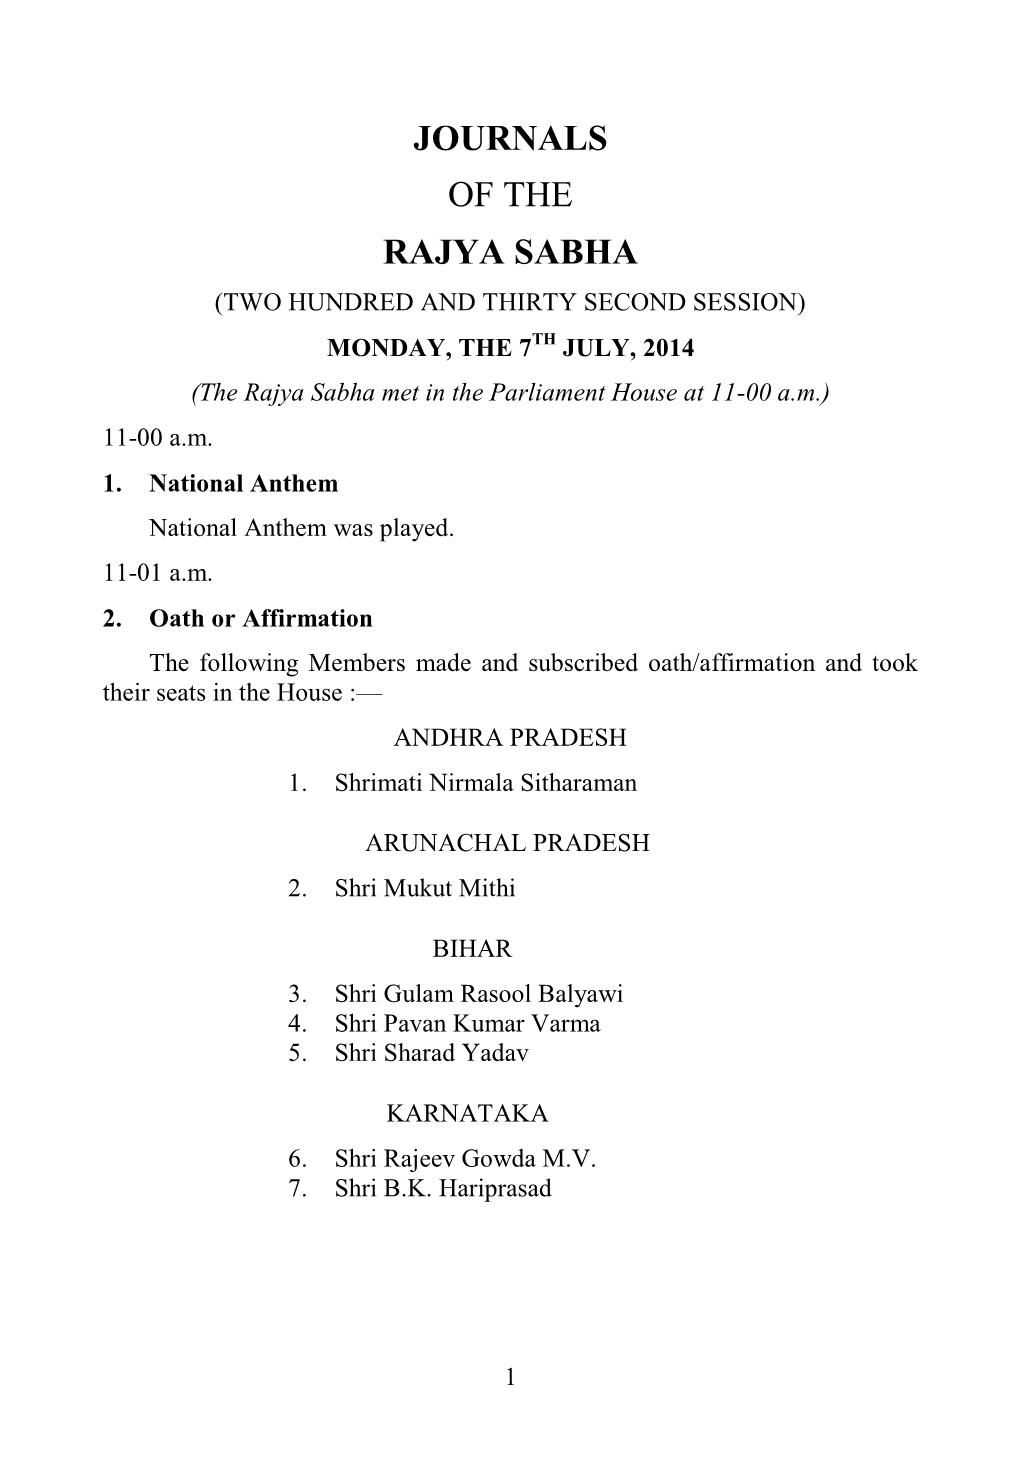 JOURNALS of the RAJYA SABHA (TWO HUNDRED and THIRTY SECOND SESSION) MONDAY, the 7TH JULY, 2014 (The Rajya Sabha Met in the Parliament House at 11-00 A.M.) 11-00 A.M